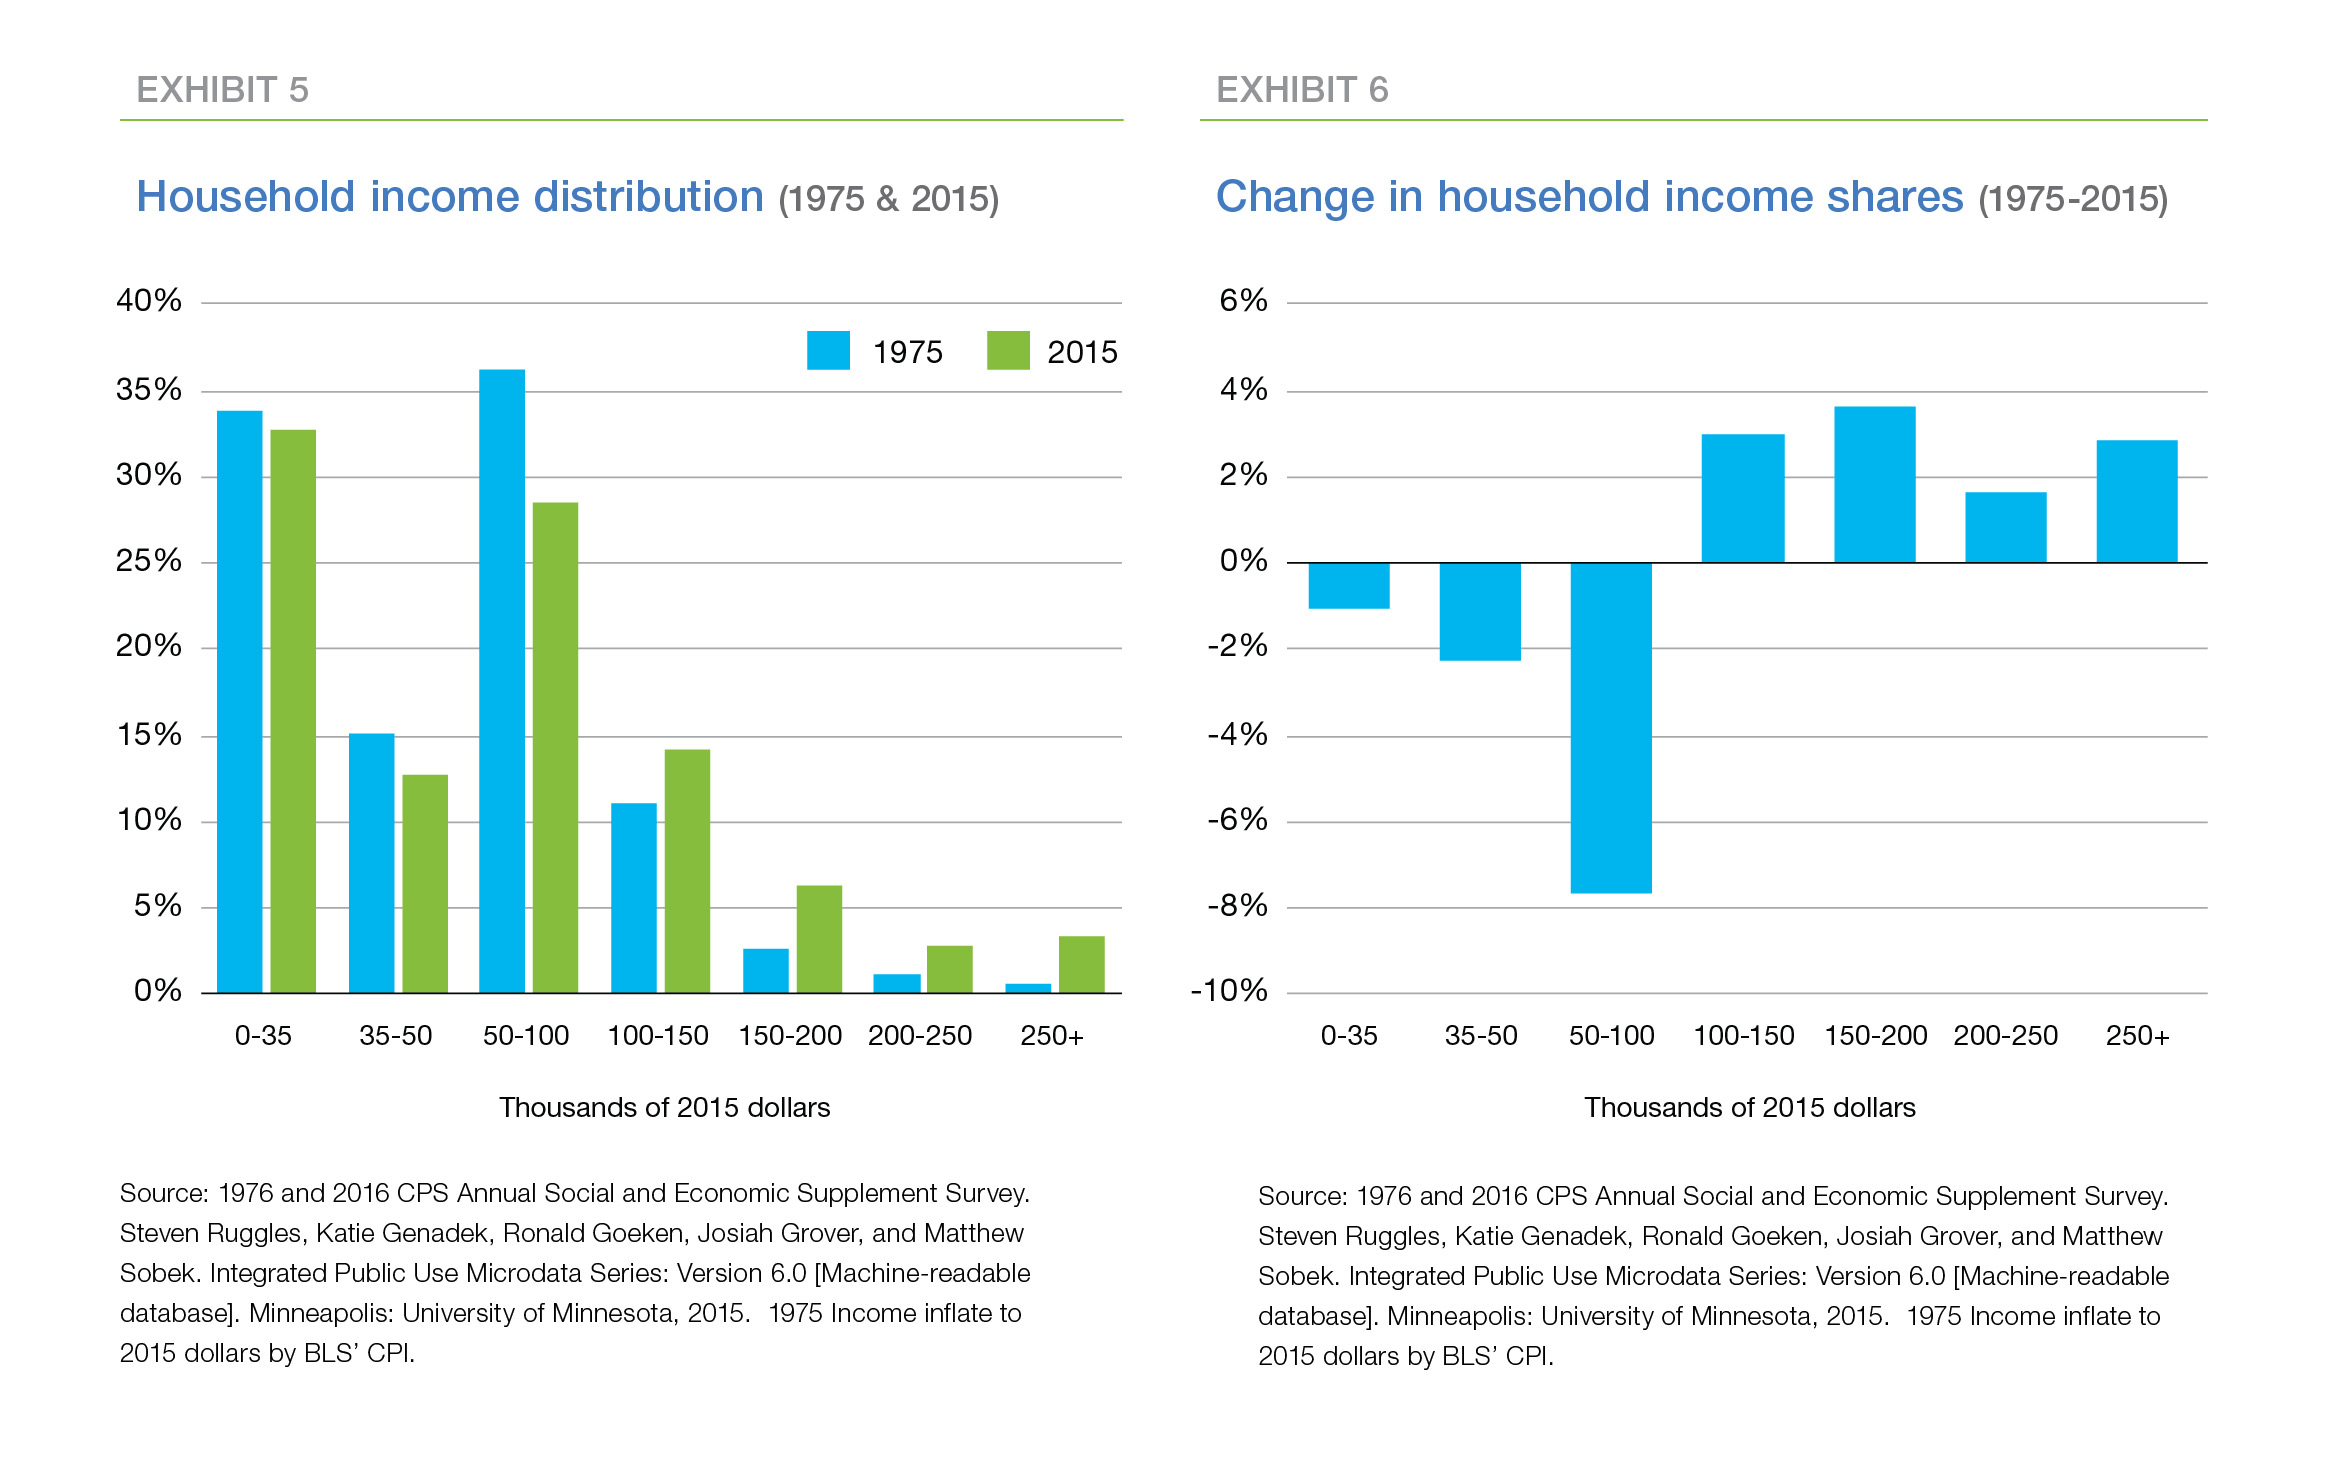 Household income distribution (1975 & 2015) vs Change in household income shares (1975-2015)